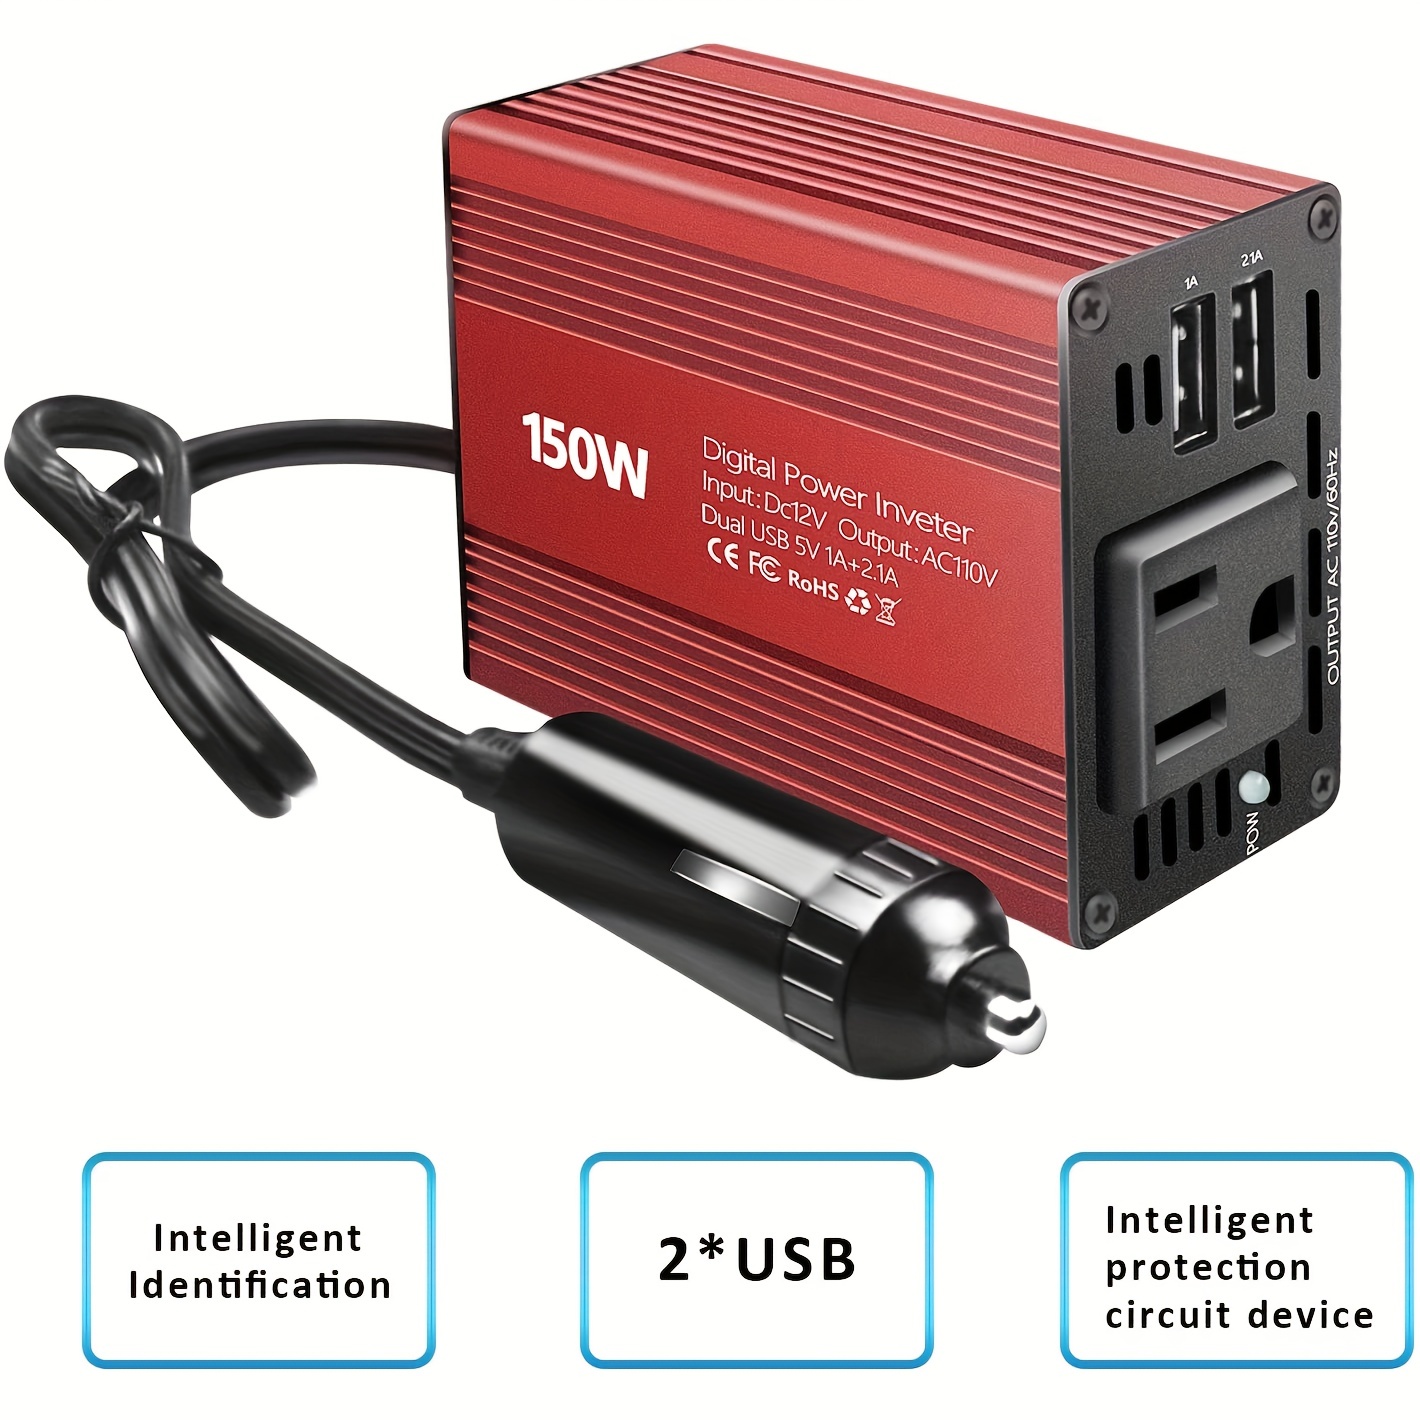 220v to 110v Converter with 2 Type-C 2 USB 3 AC 300W Power Converter Adapter